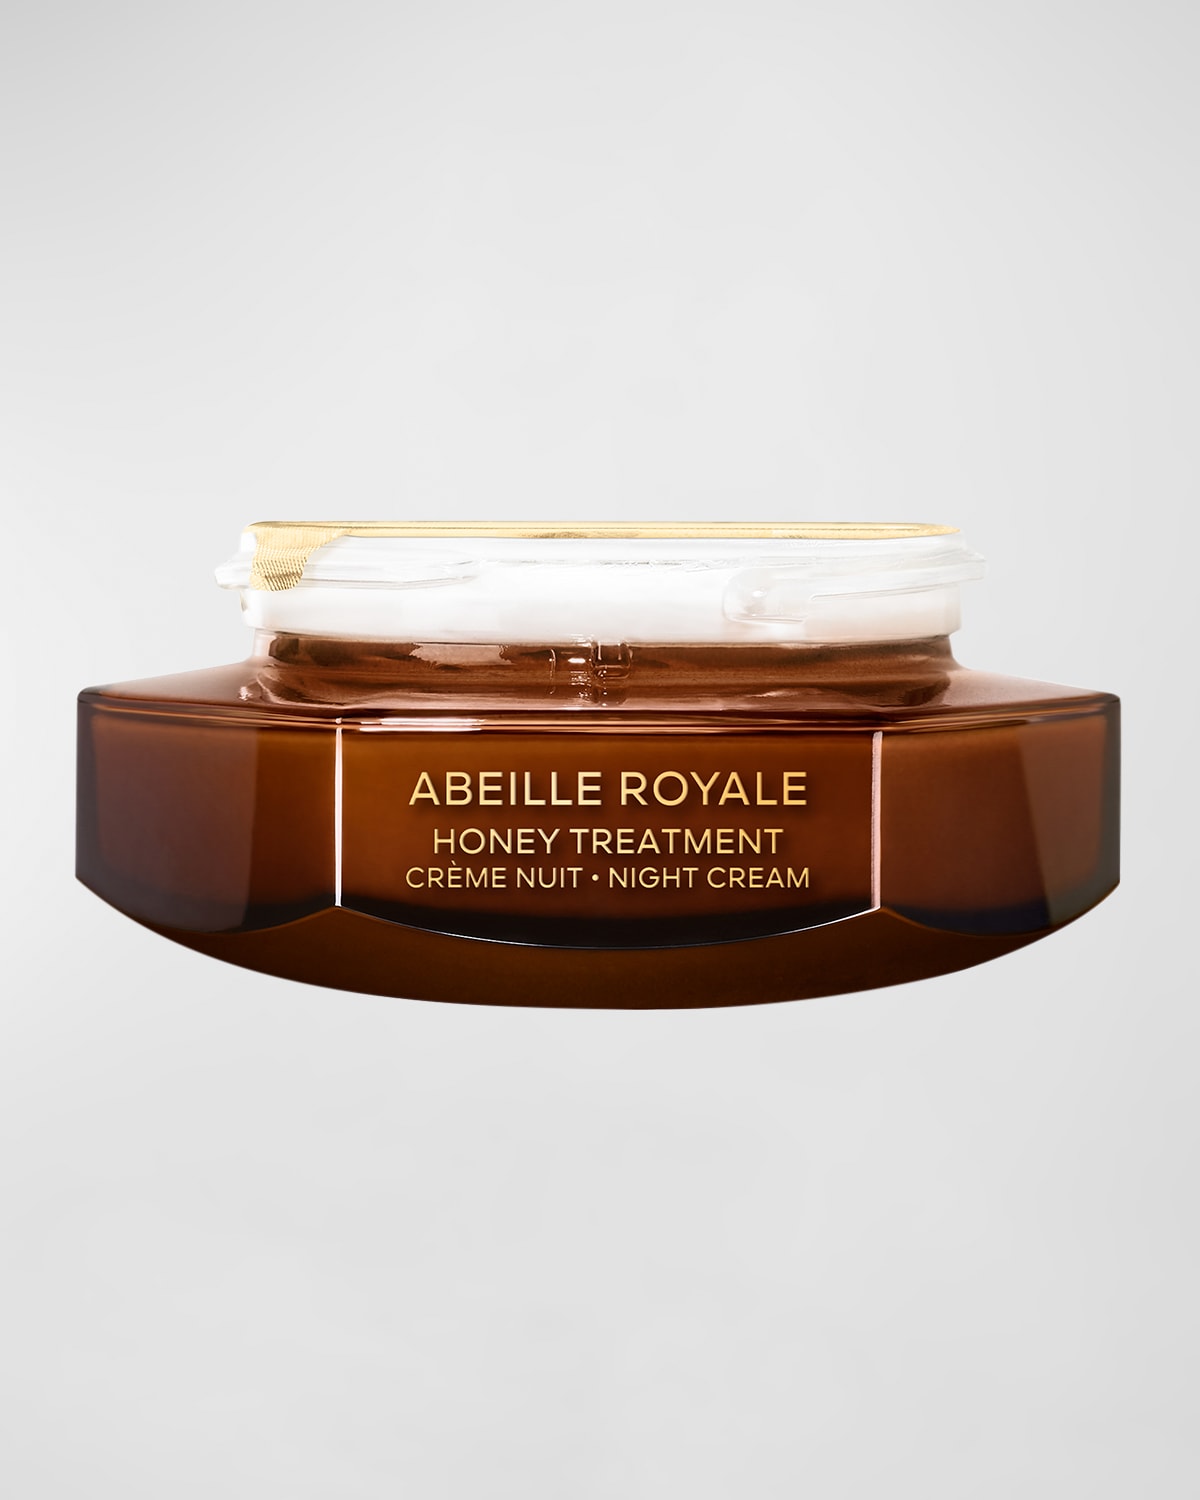 Abeille Royale Honey Treatment Night Cream with Hyaluronic Acid, The Refill, 1.7 oz.